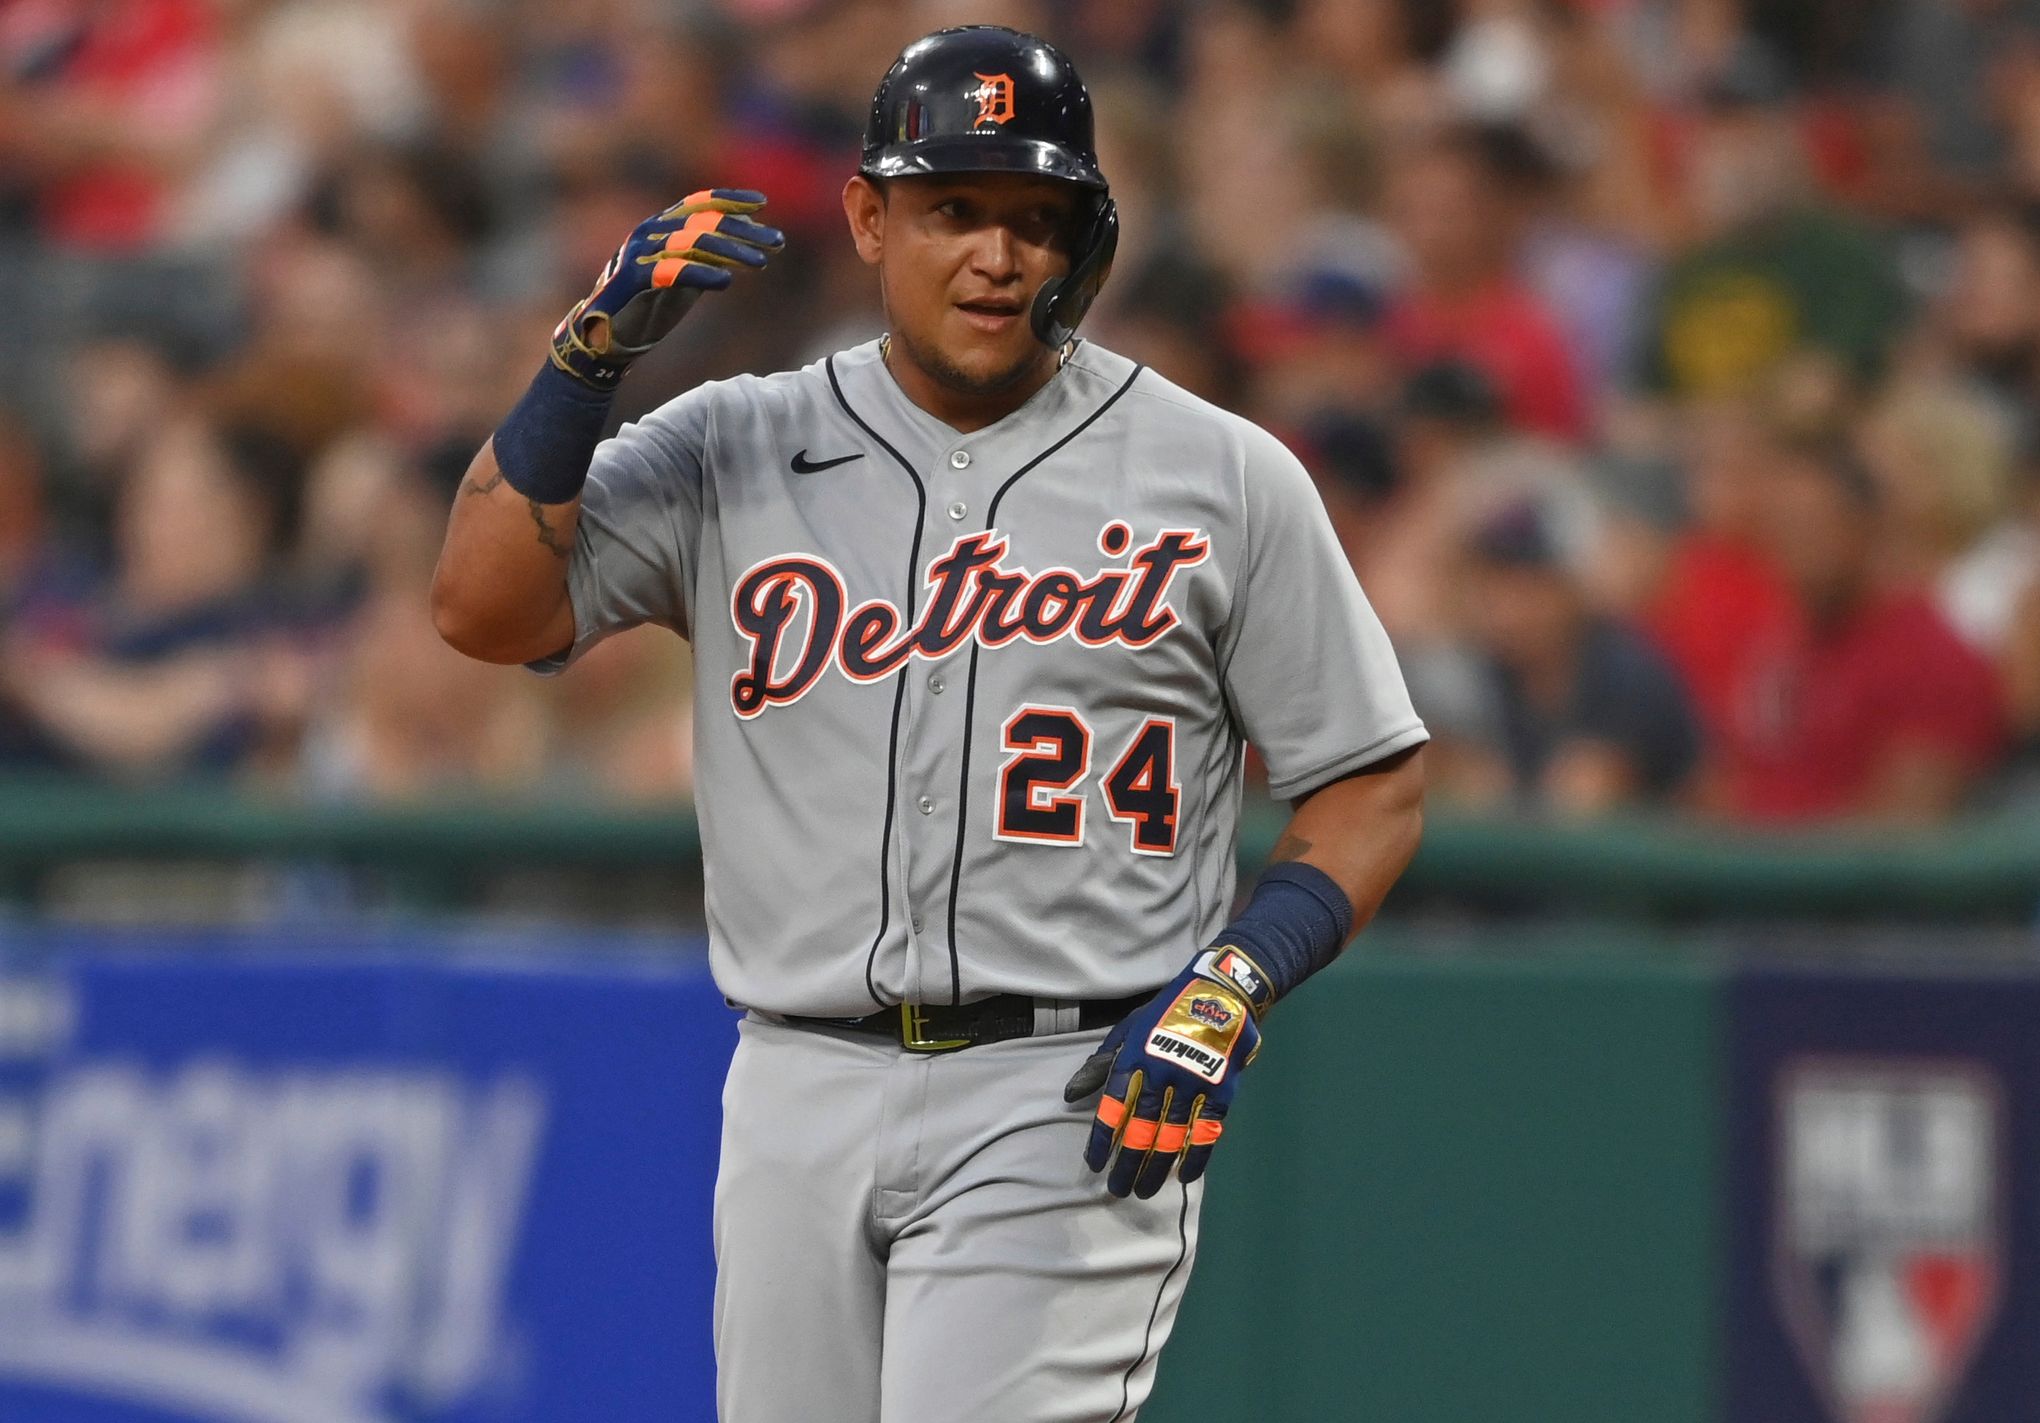 Tigers rookie Akil Baddoo hits homer on first MLB pitch, then